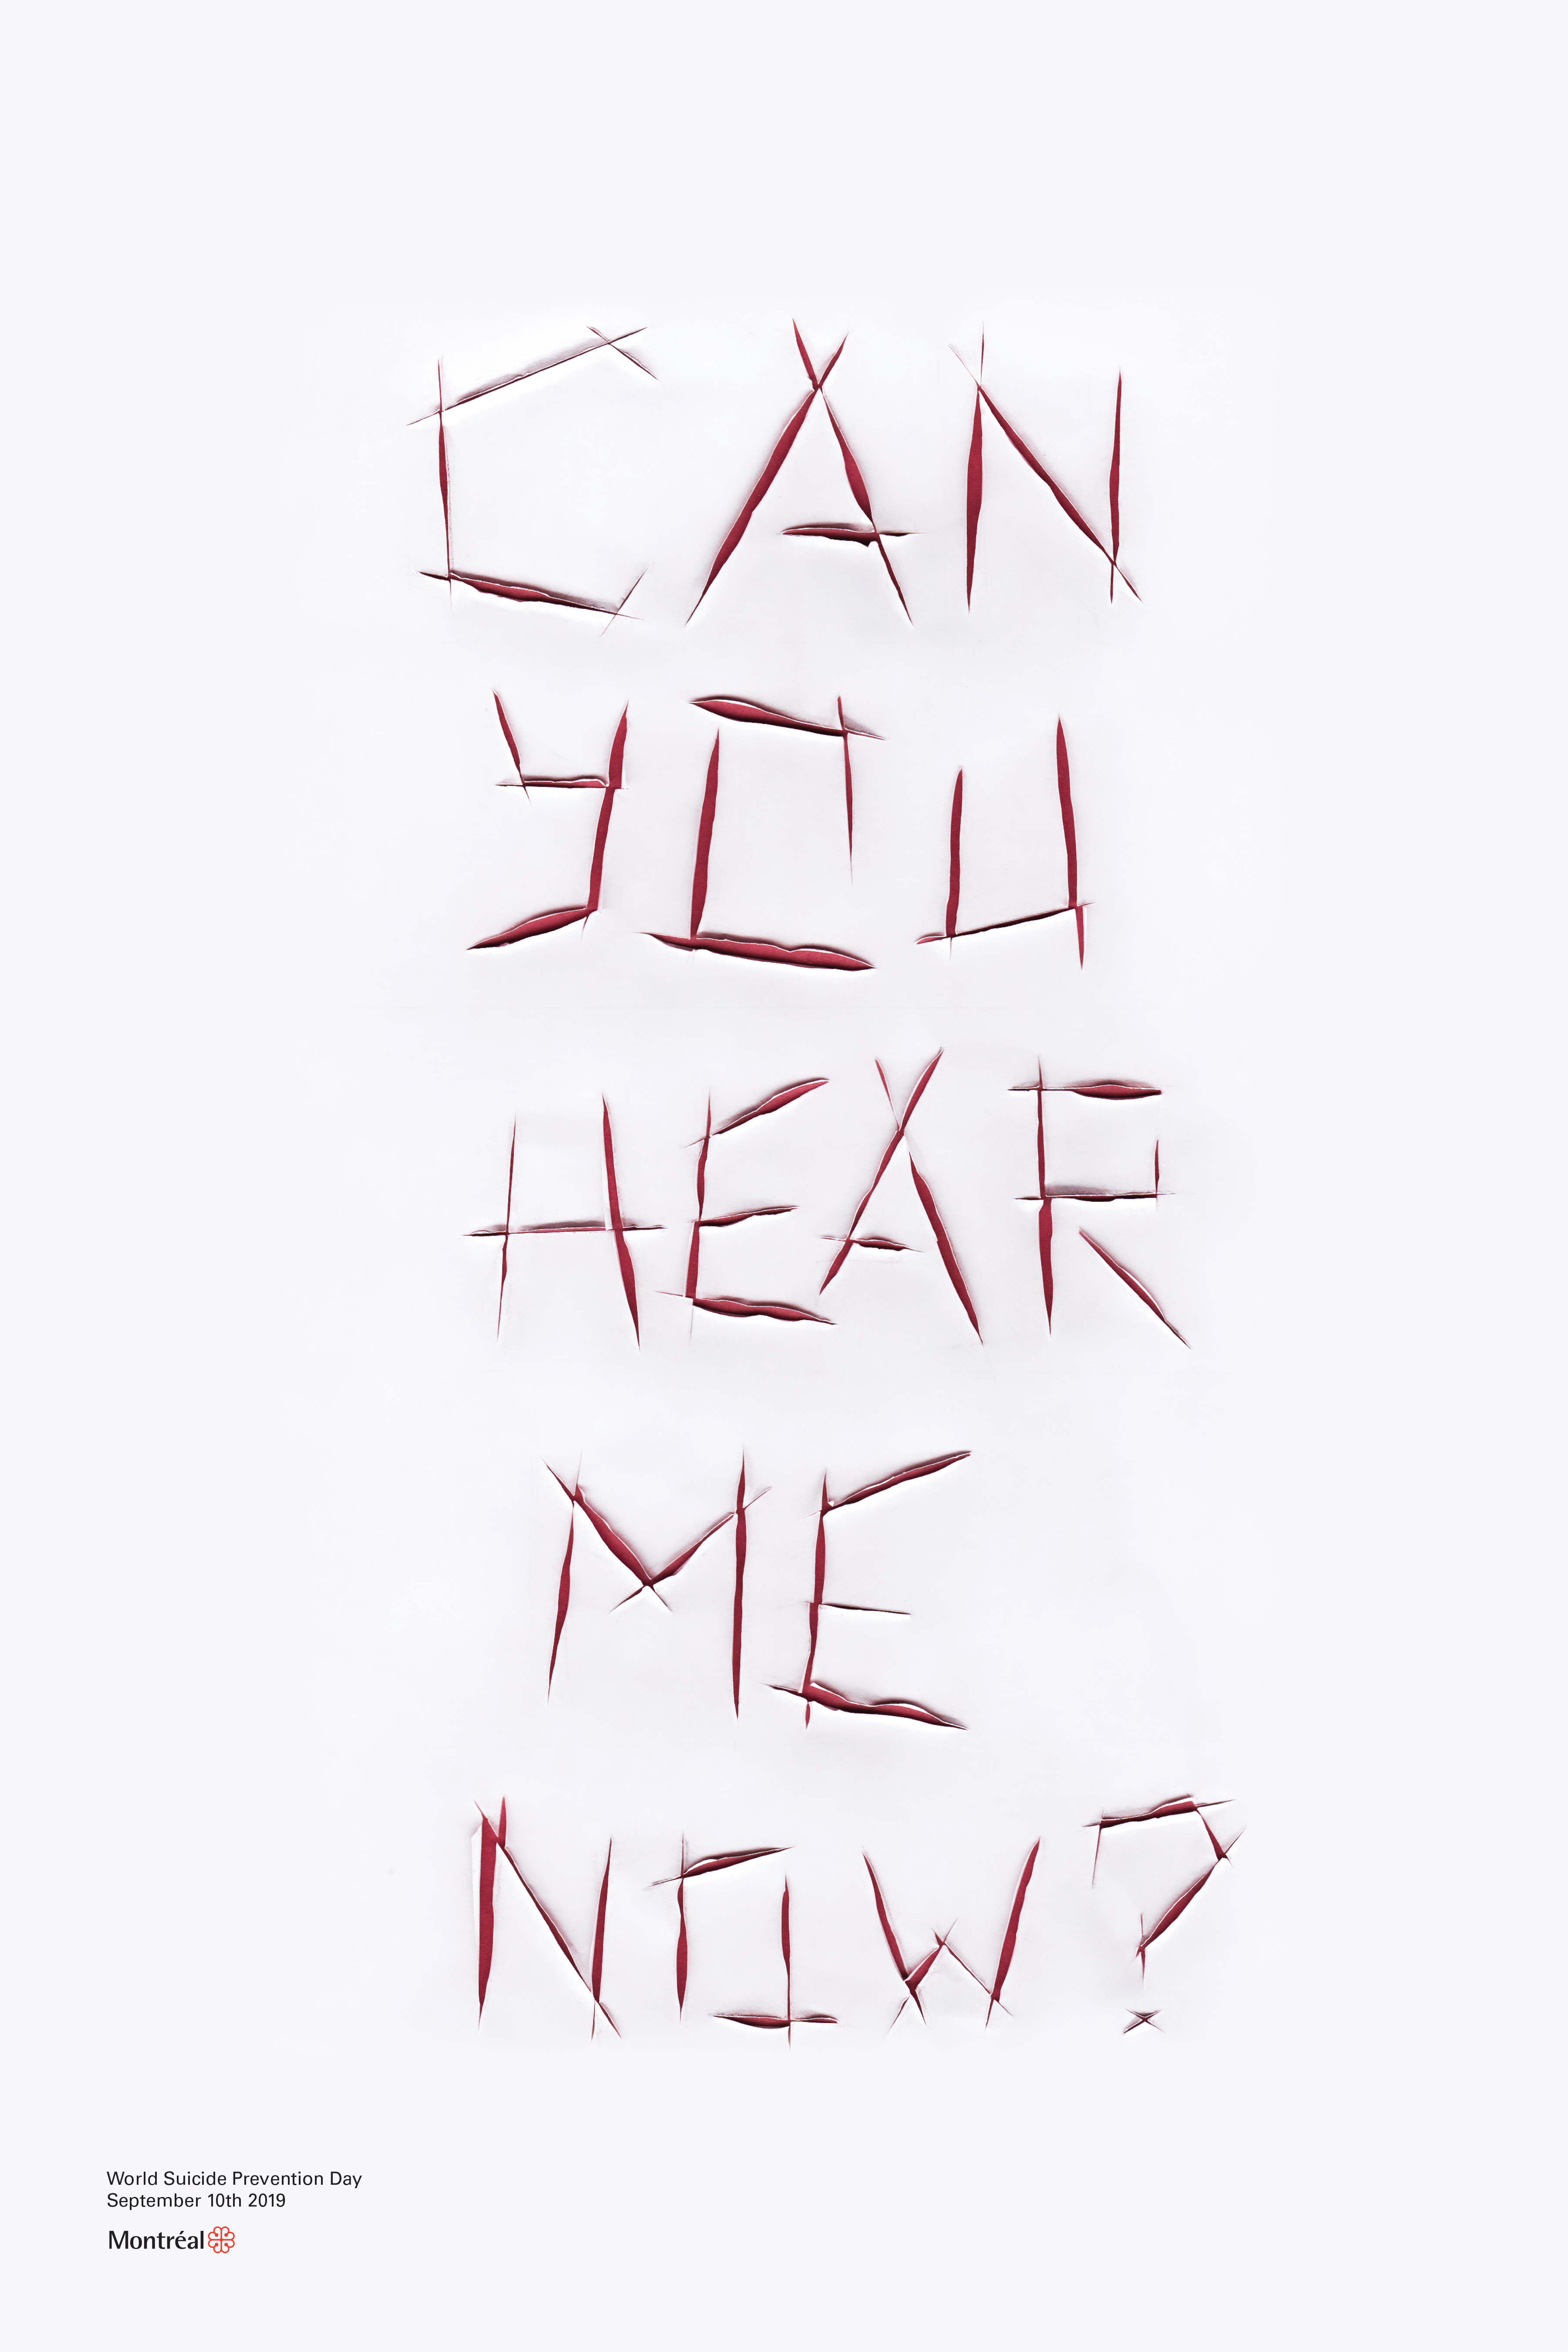 World Suicide Prevention Day Poster: "Can you hear me now?" written in all caps as if cut into oneself.